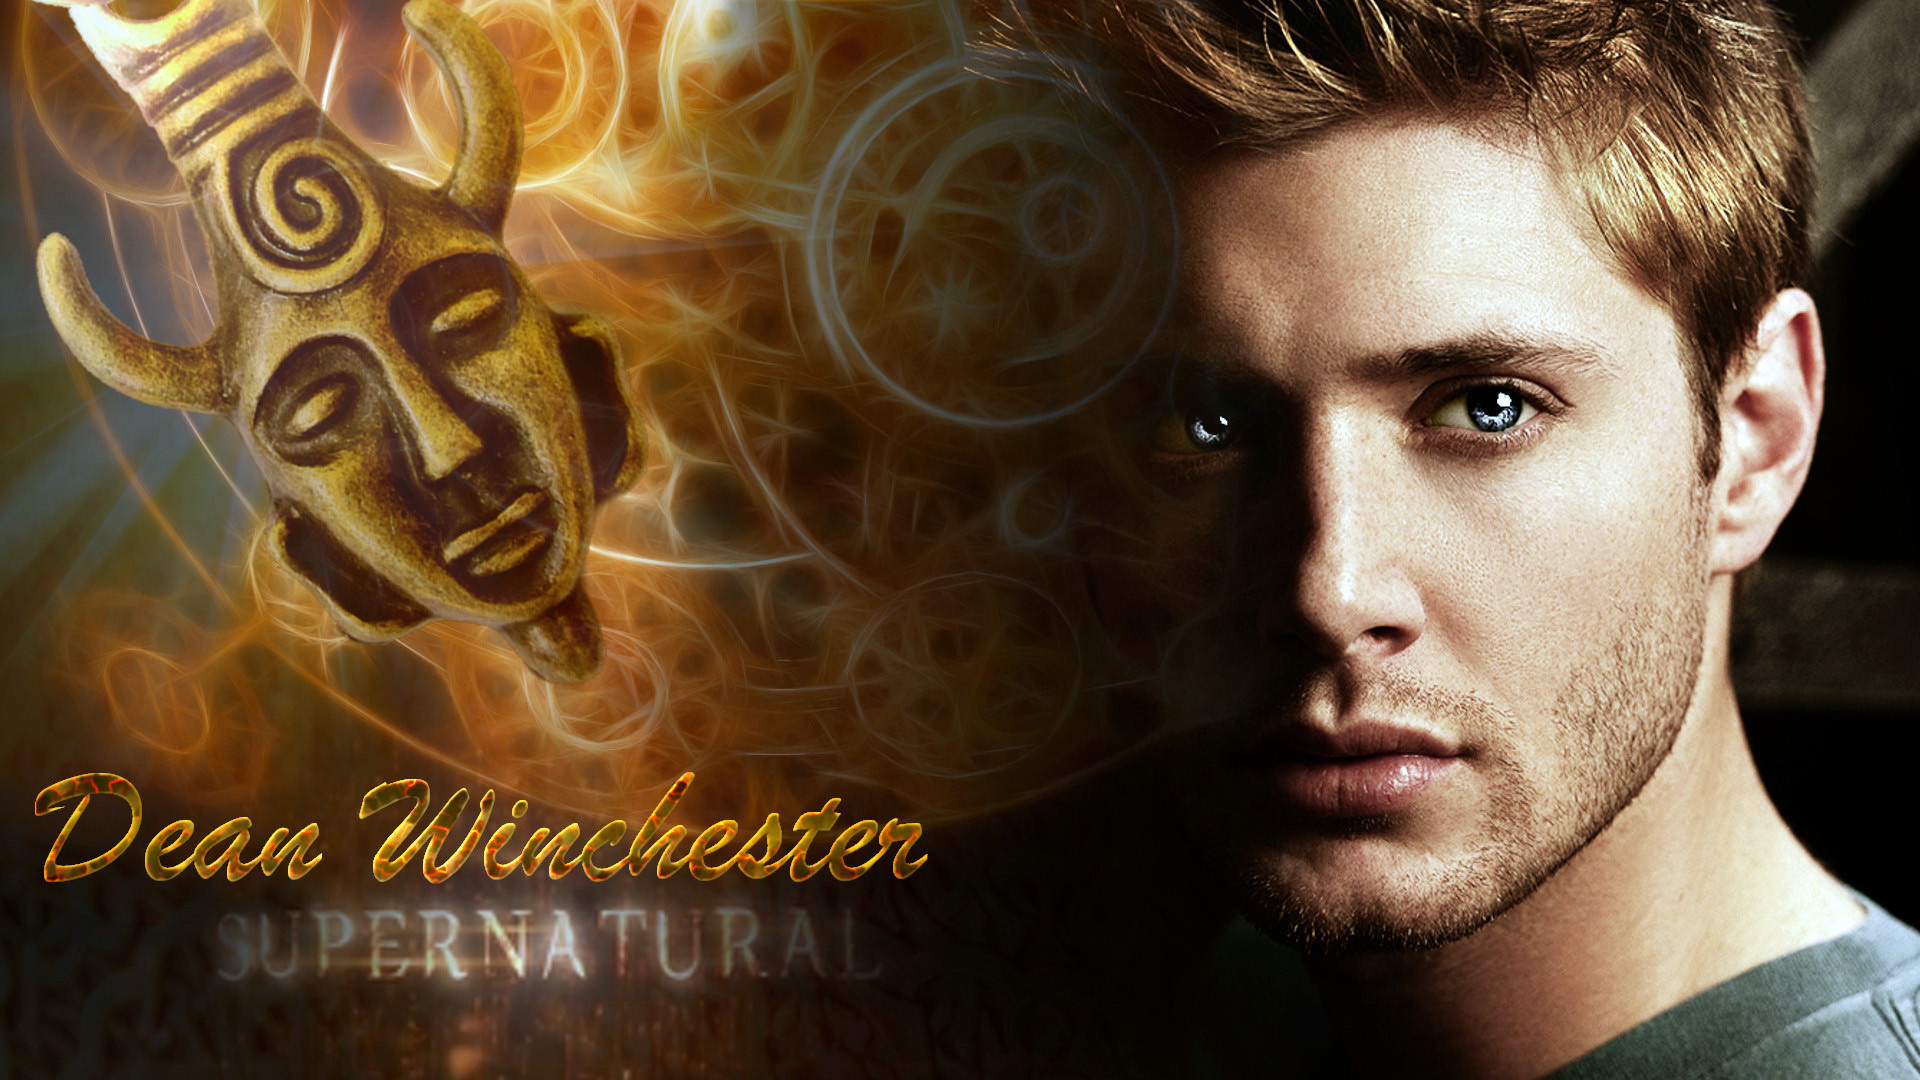 1920x1080 dean-winchester-supernatural-supernatural-dean-and-sam -for-android-tumblr-iphone-wallpaper-wpt7003775